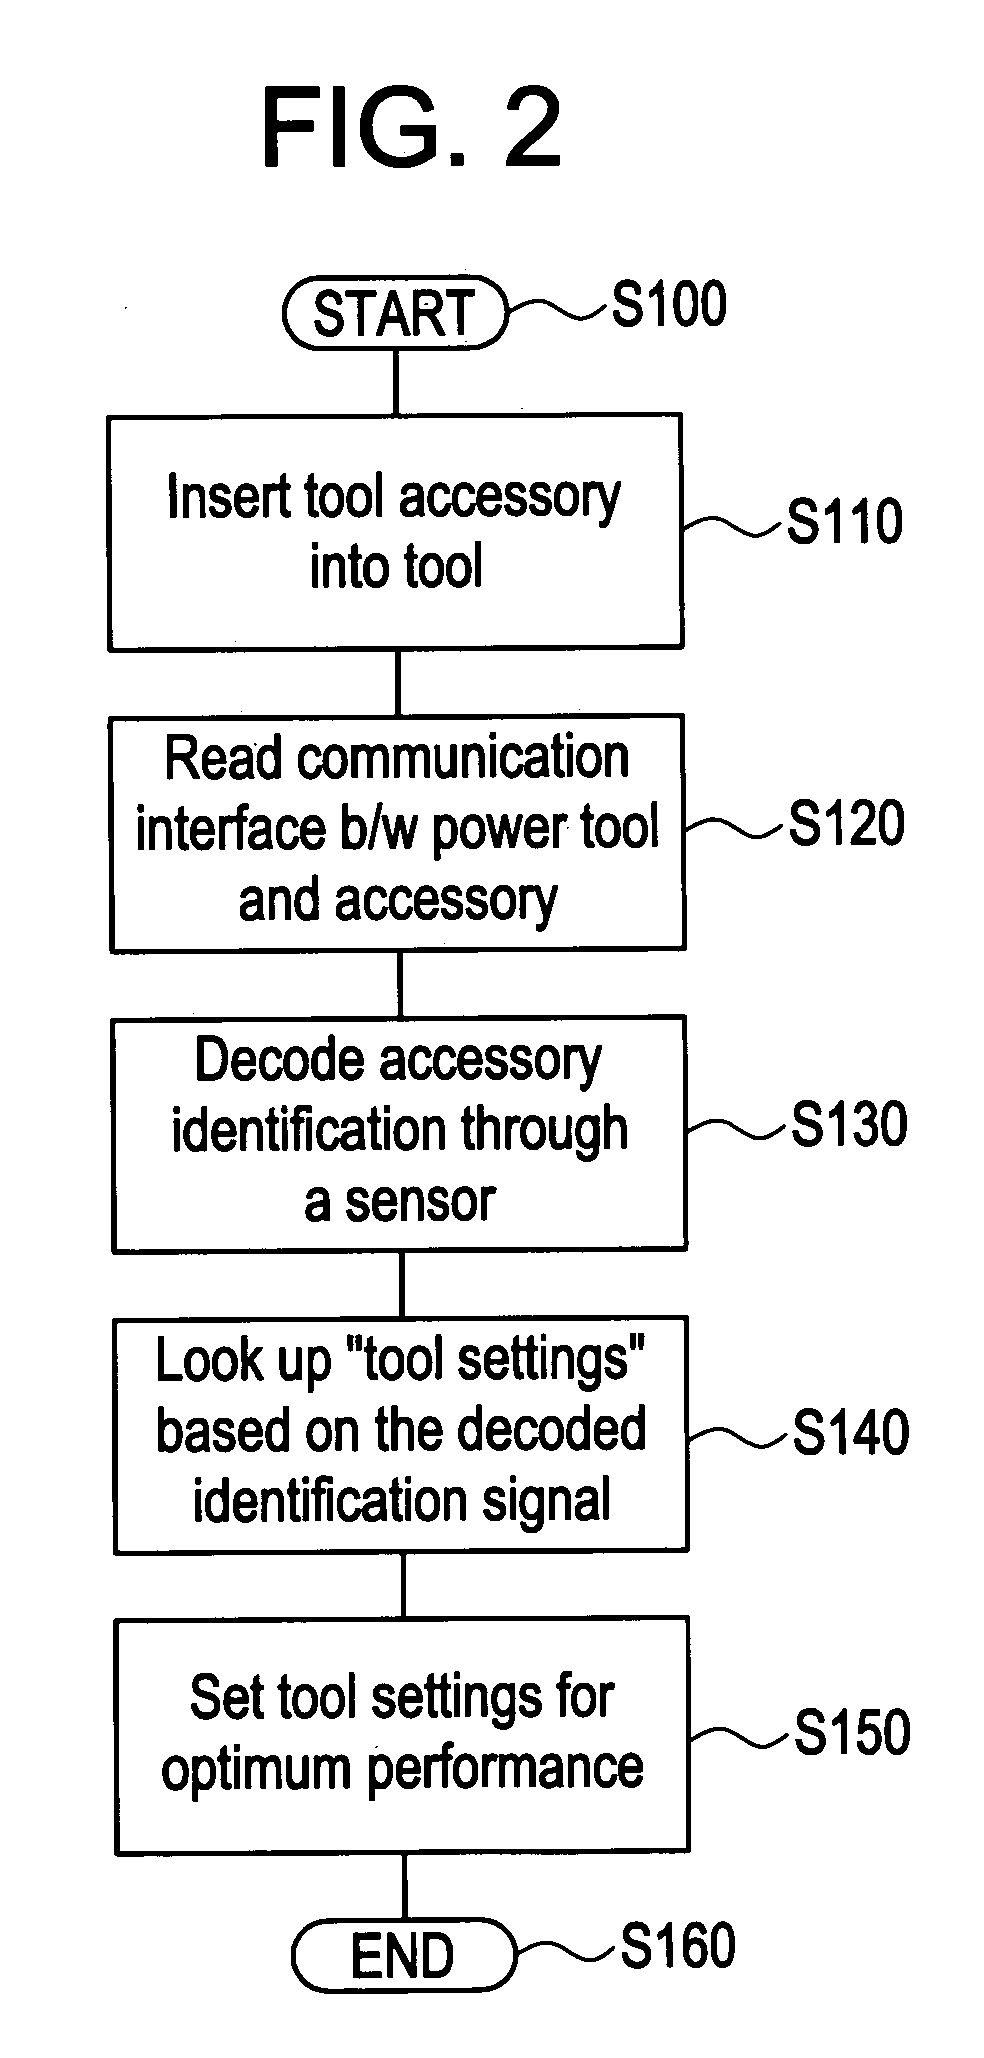 Power tool accessory identification system